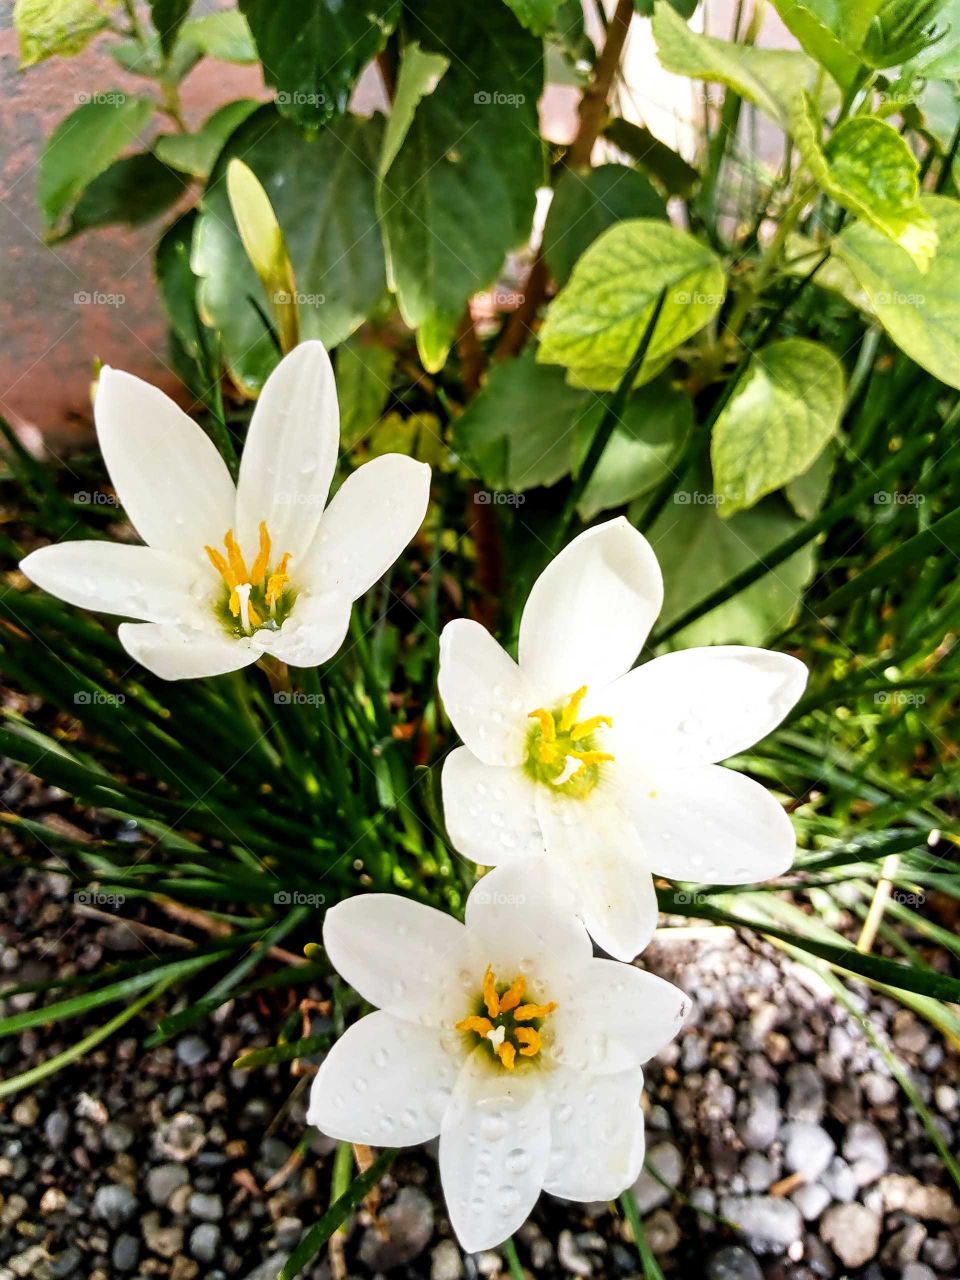 White Lily flowers.